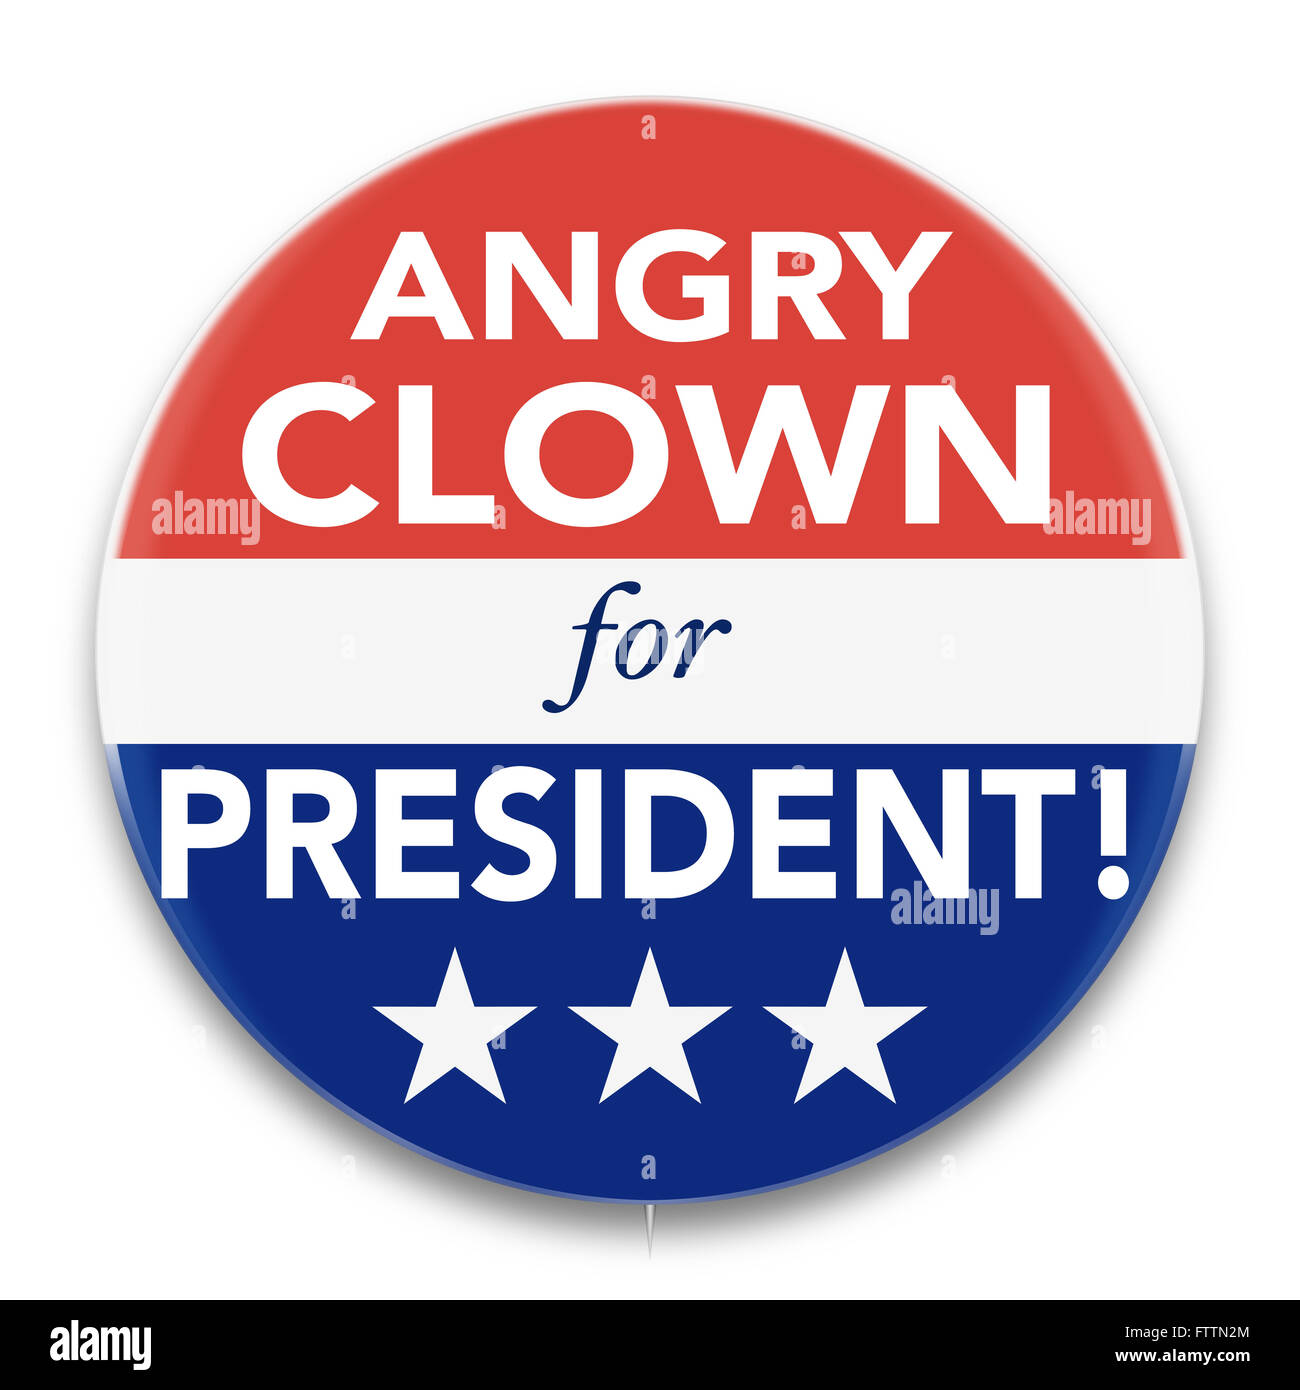 Illustration of a political pin, in red, white, and blue, promoting an angry clown to be President of the USA. Stock Photo